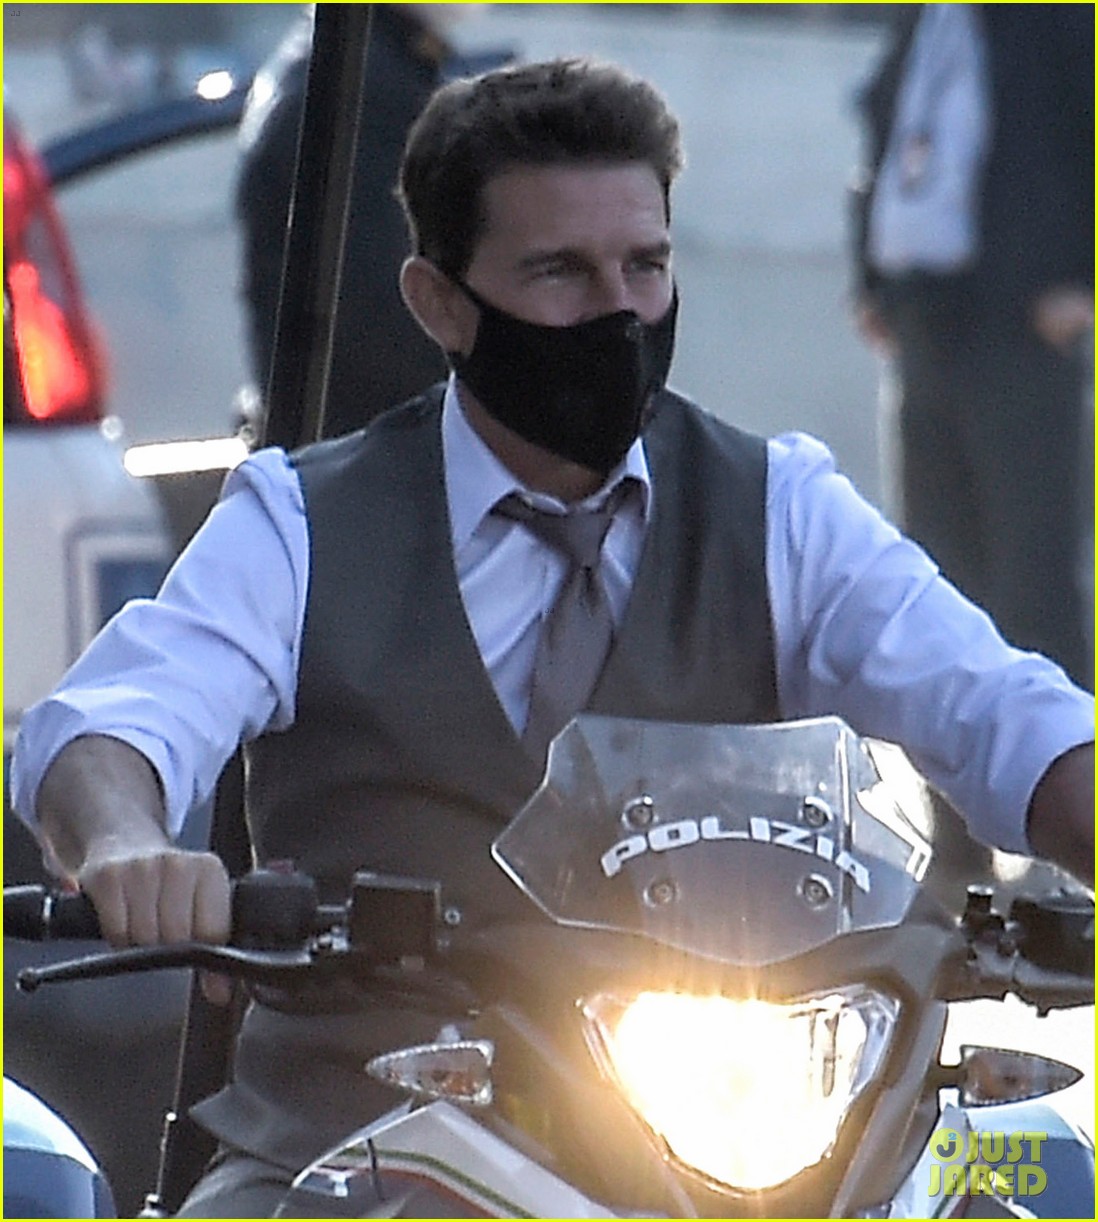 tom-cruise-rides-a-police-bike-for-mission-impossible-7-scene-04.jpg